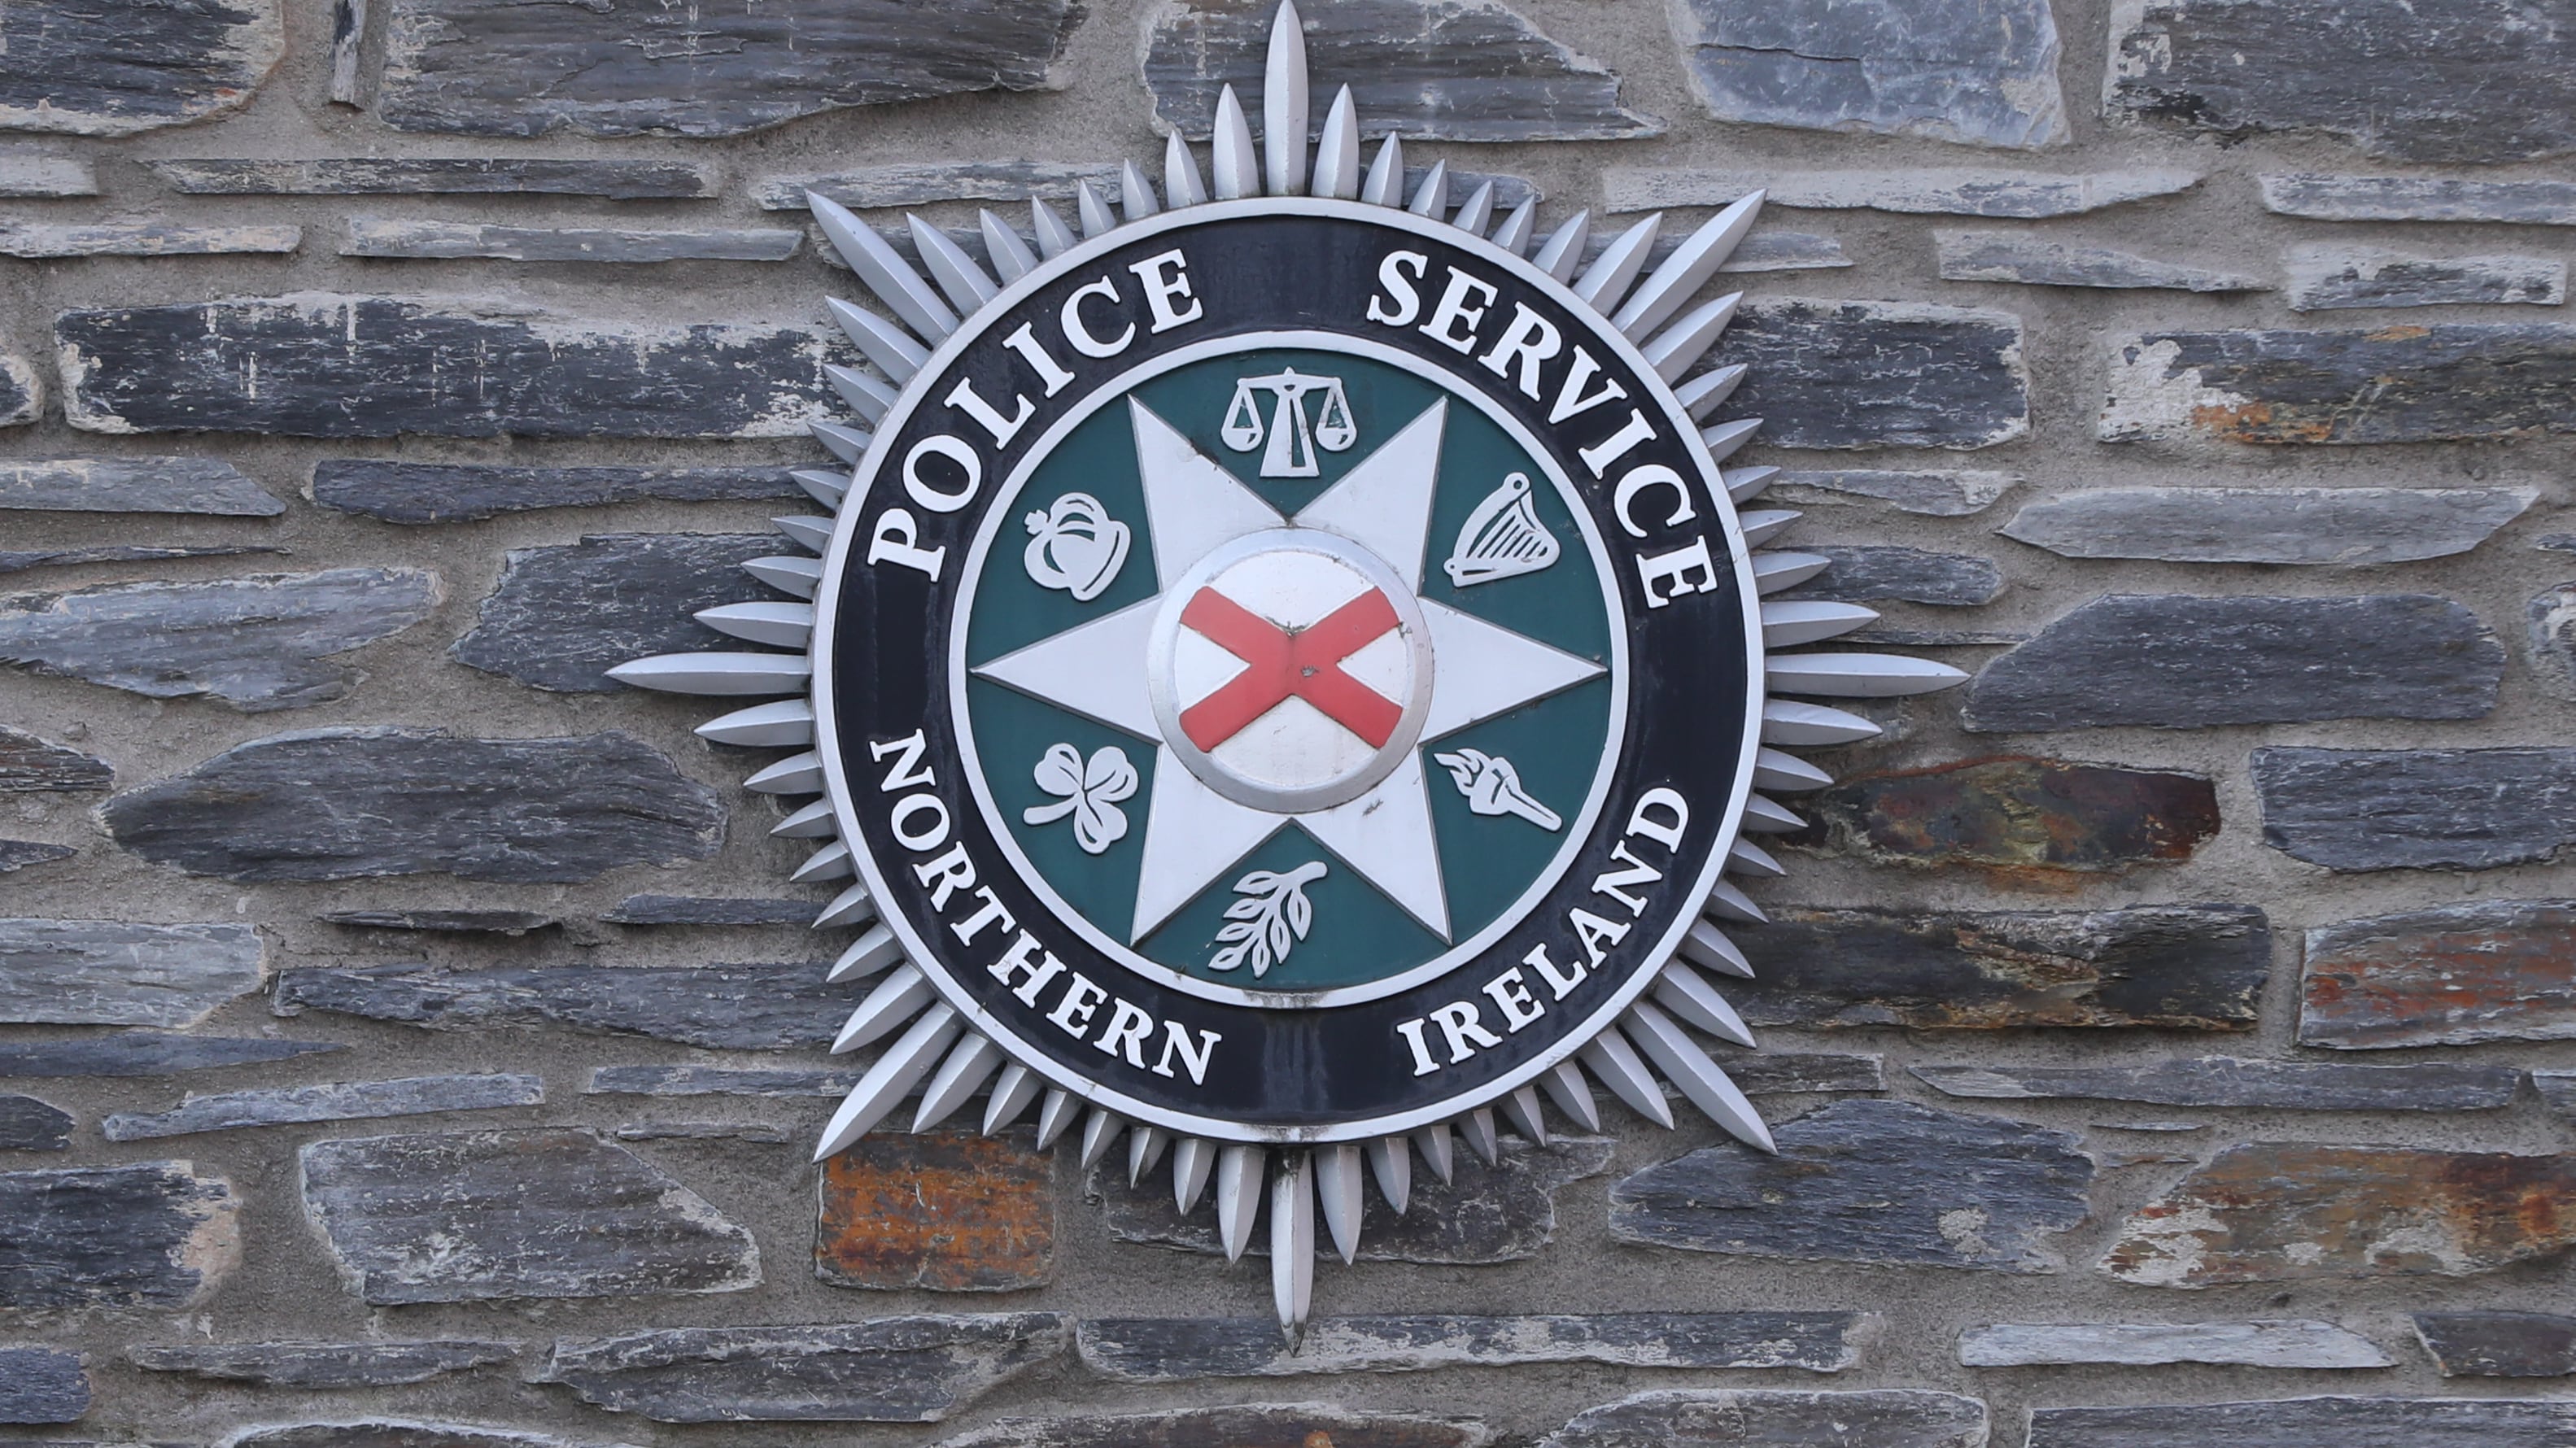 The PSNI said a man has been arrested following the sudden death of a woman in Bangor